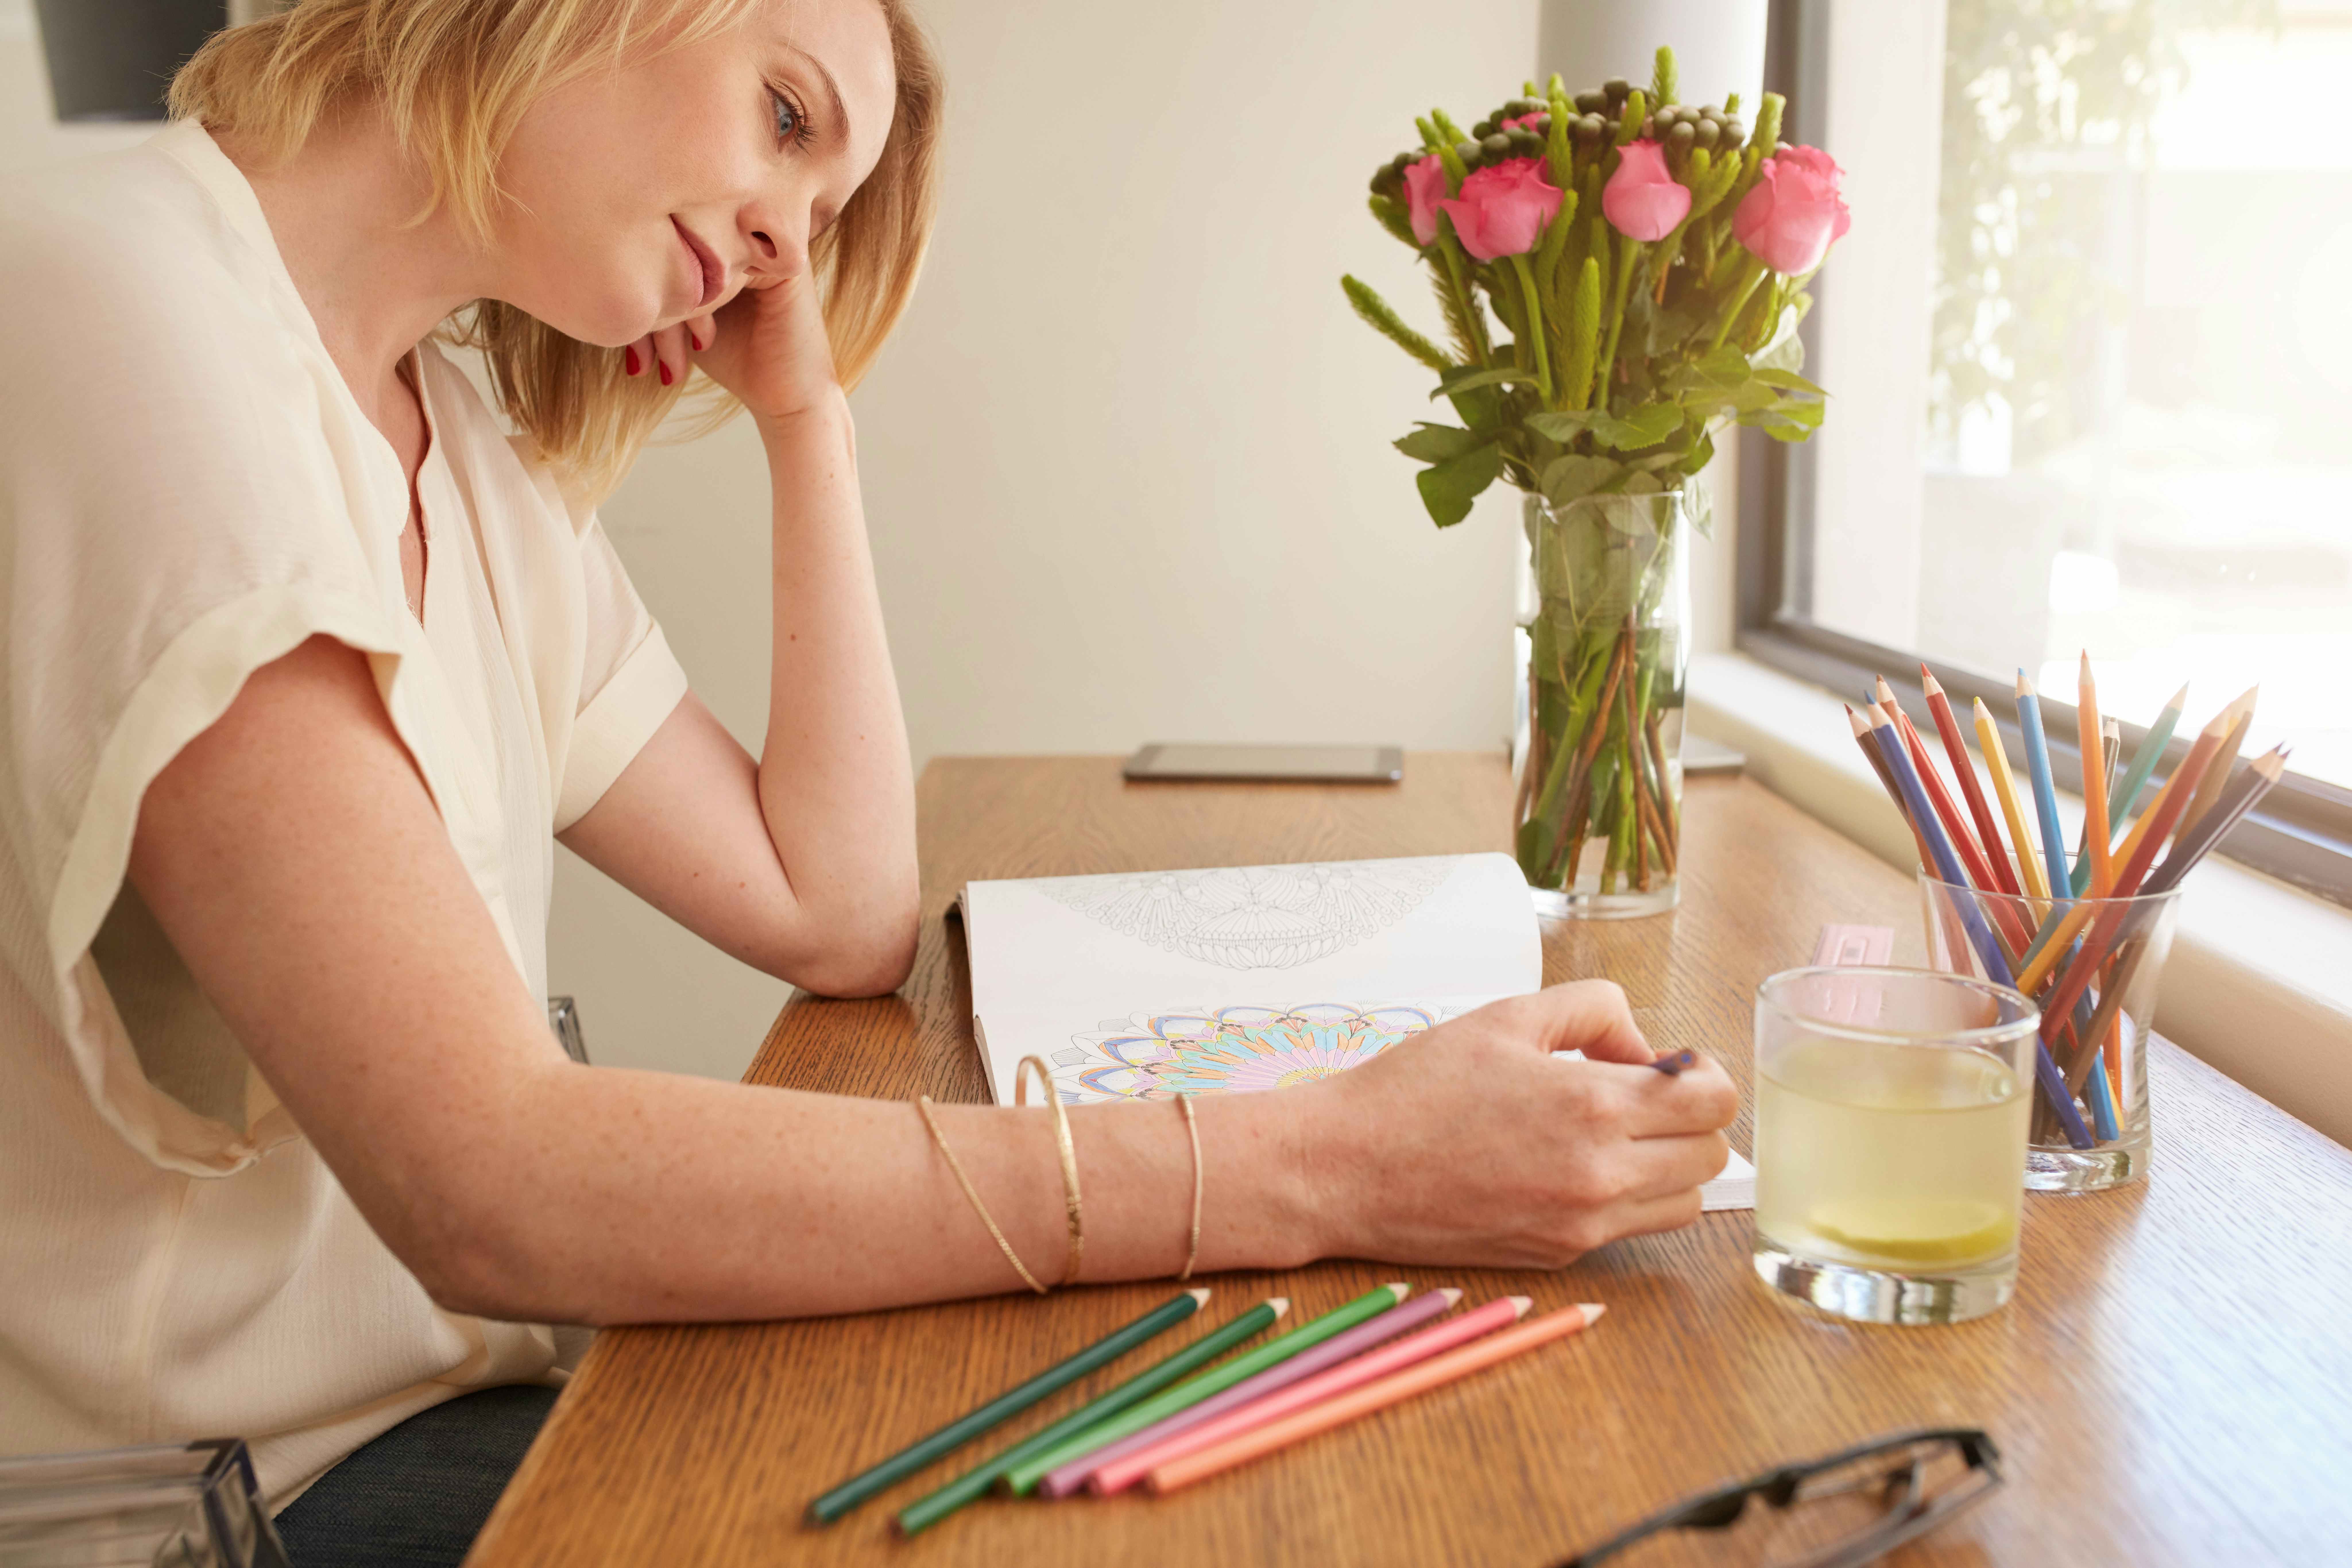 A person using colored pencils to color in an adult coloring book.